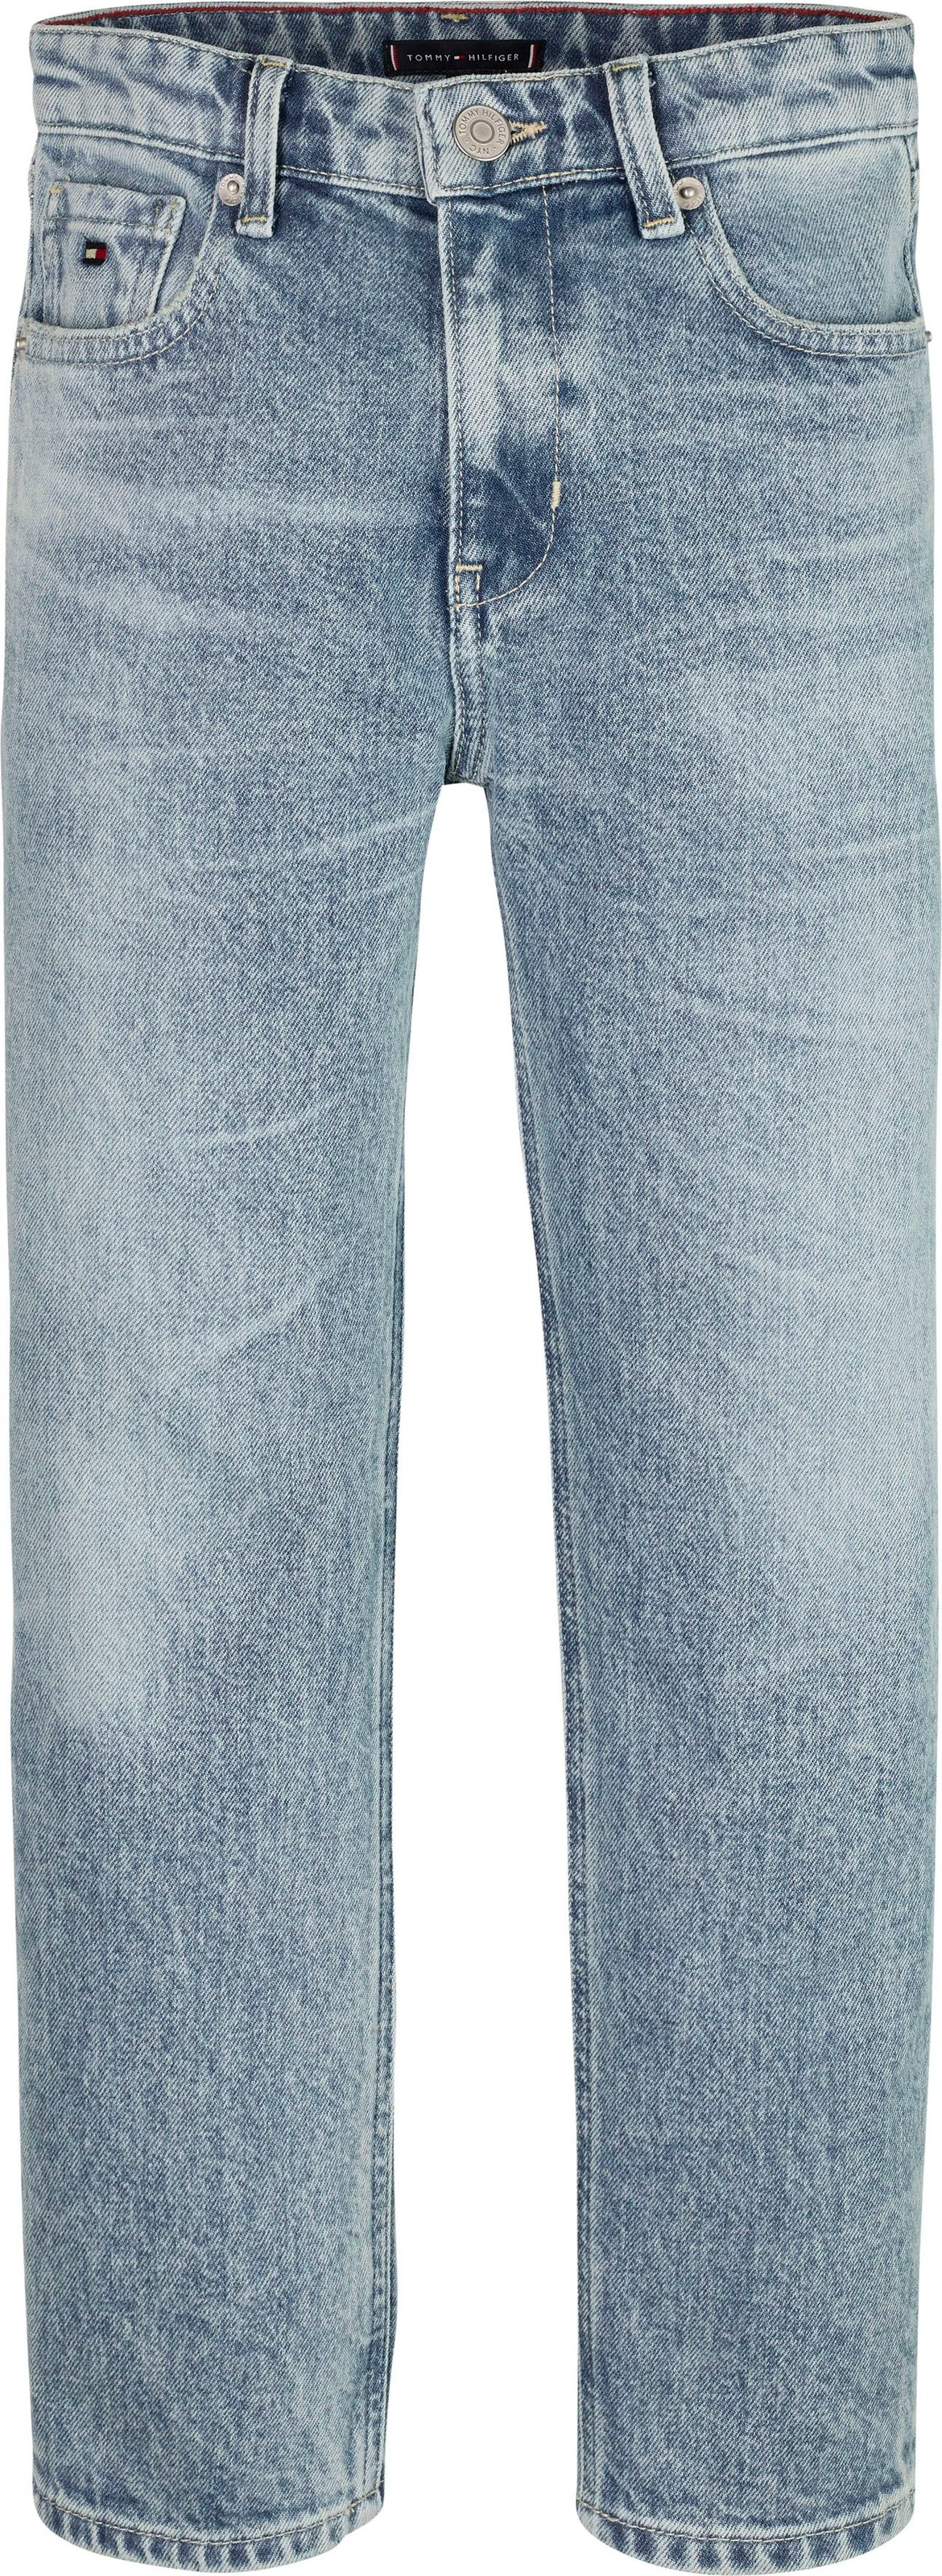 Tommy Hilfiger RECYCLED«, 5-Pocket-Style Bequeme JEAN kaufen Jeans im »SKATER